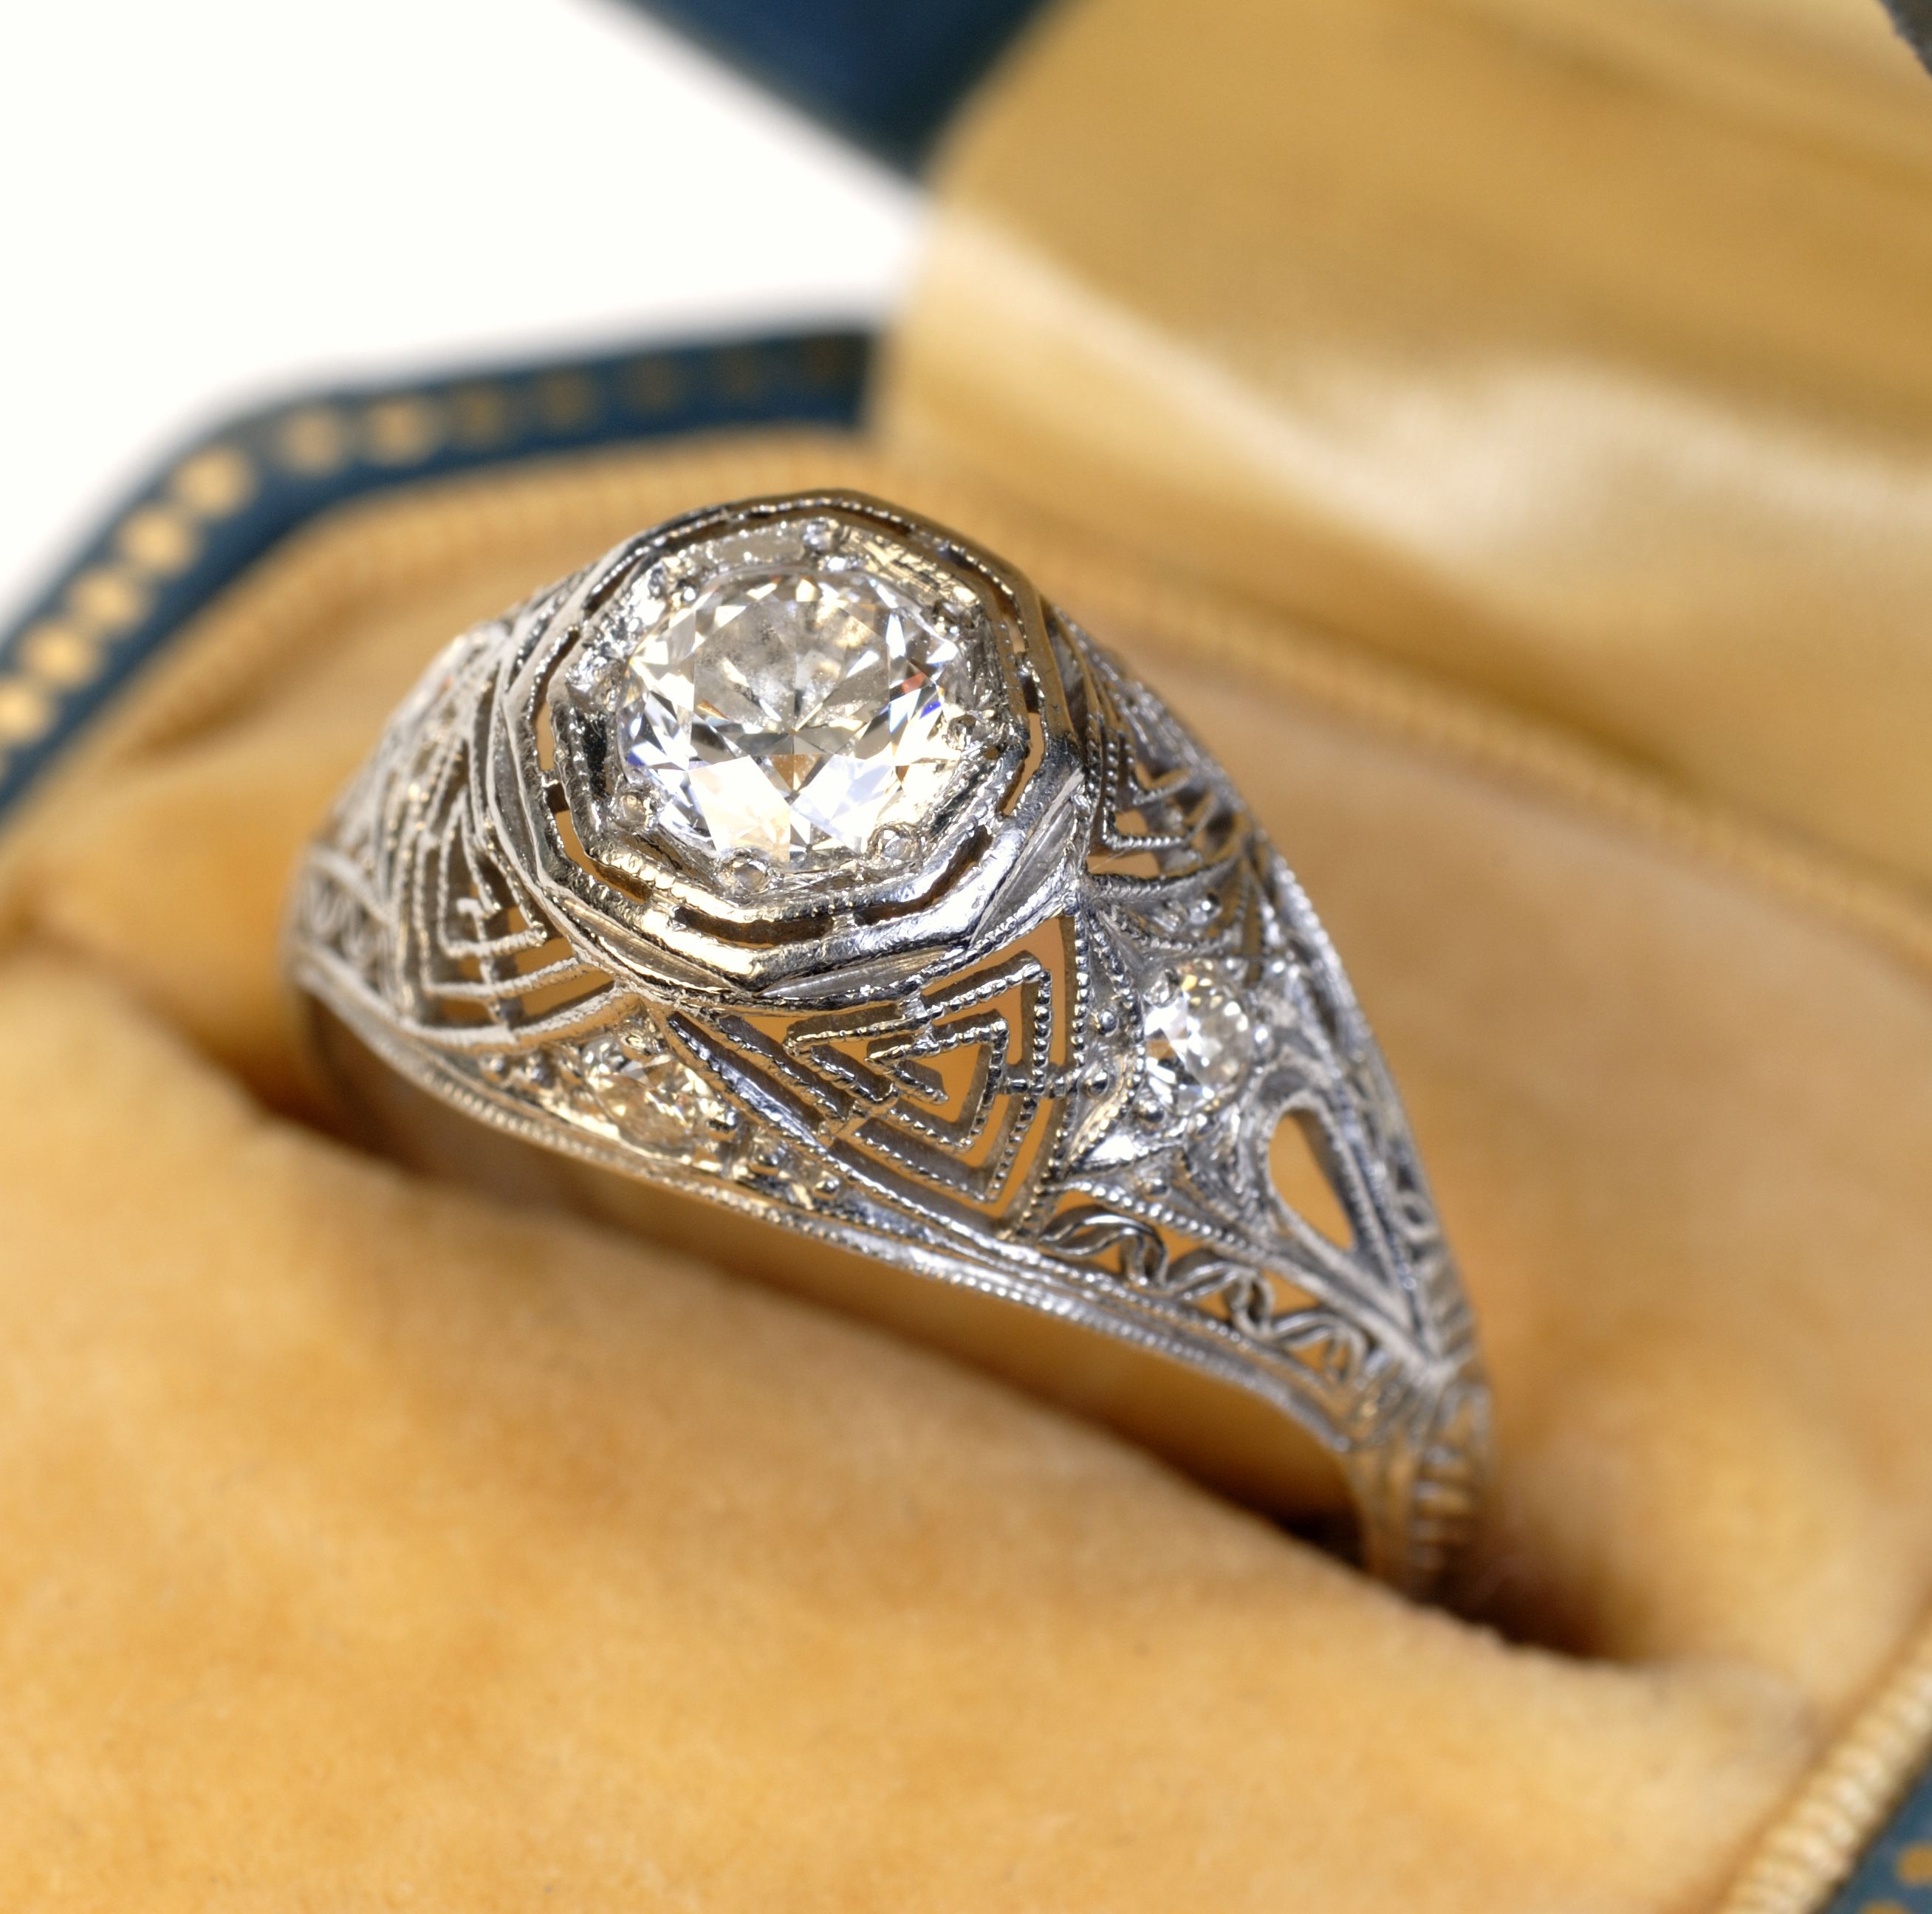 Is It a Good Idea to Propose With an Heirloom (or Secondhand) Ring?